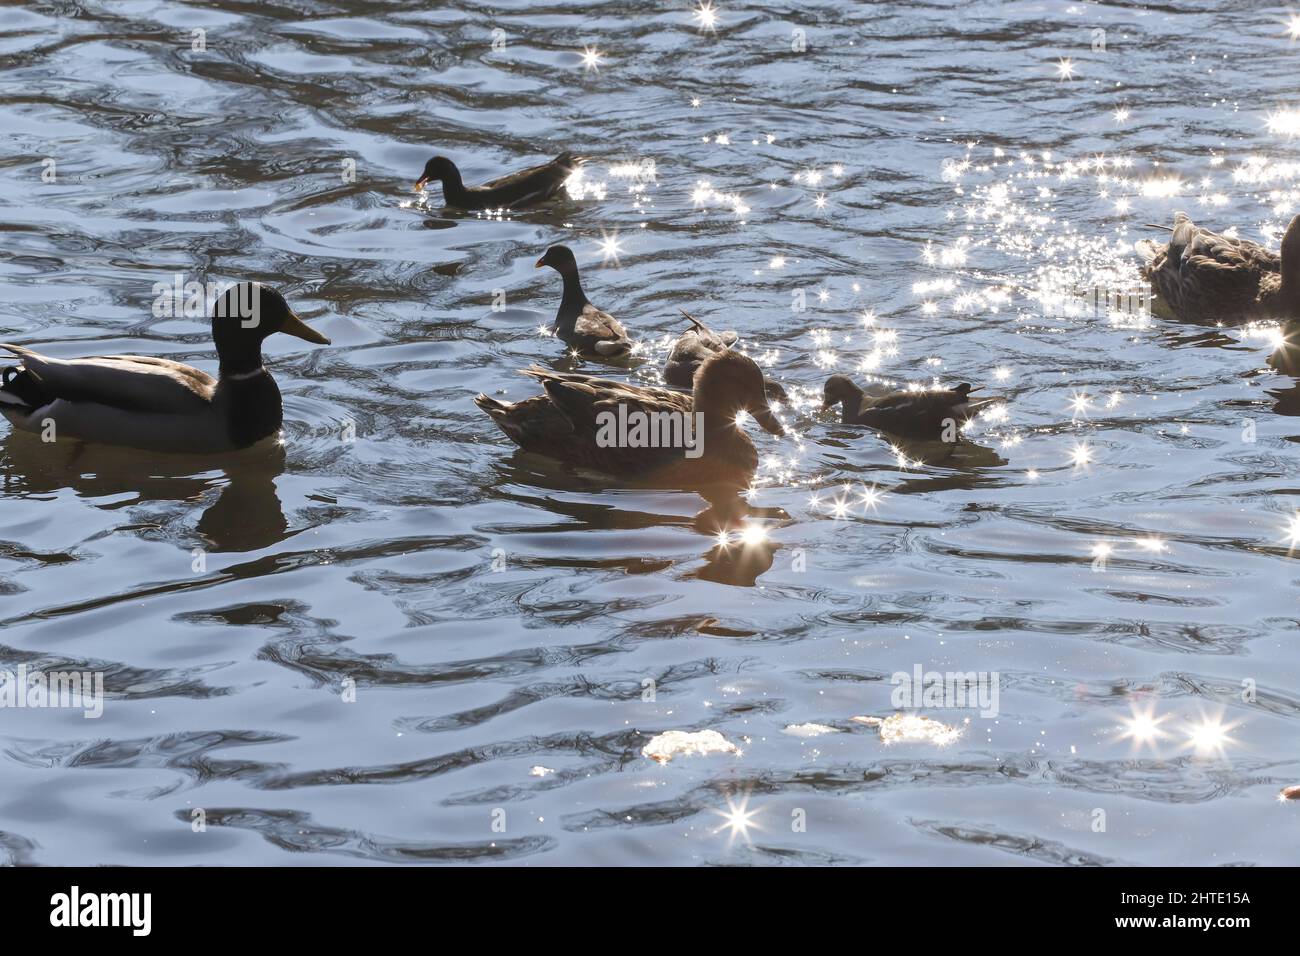 Water birds Mallard ducks and Moorhen (Gallinula) in a lake of contrasting light and sun flares Stock Photo